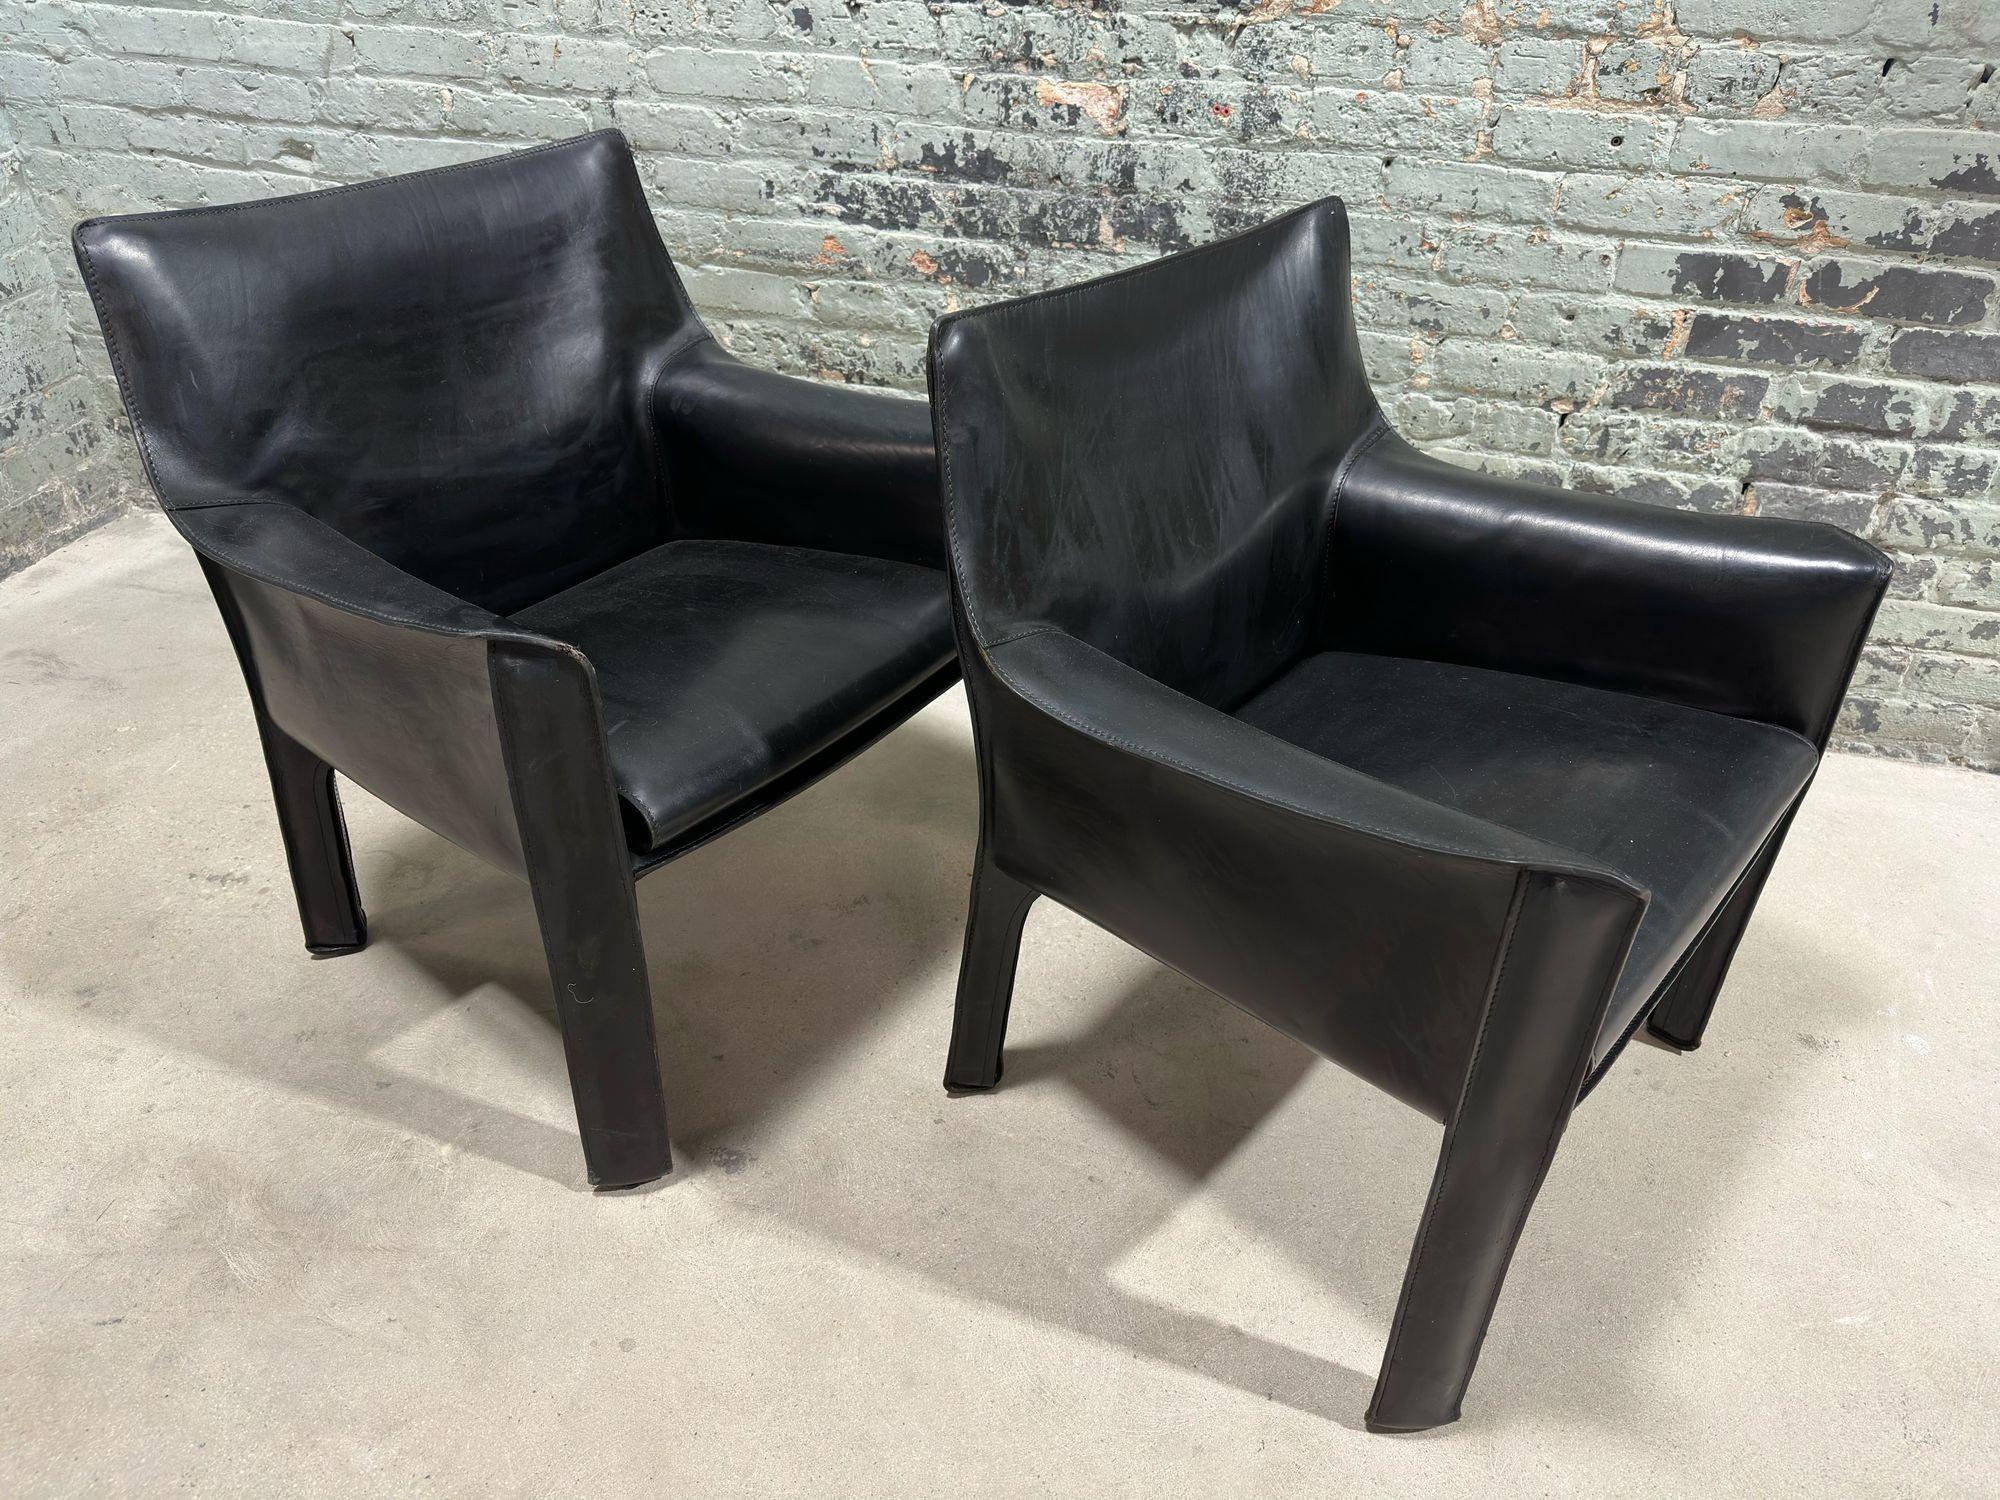 Italian Pair Mario Bellini Black Leather Cab Chairs, Model 414 for Cassina Italy, 1980 For Sale